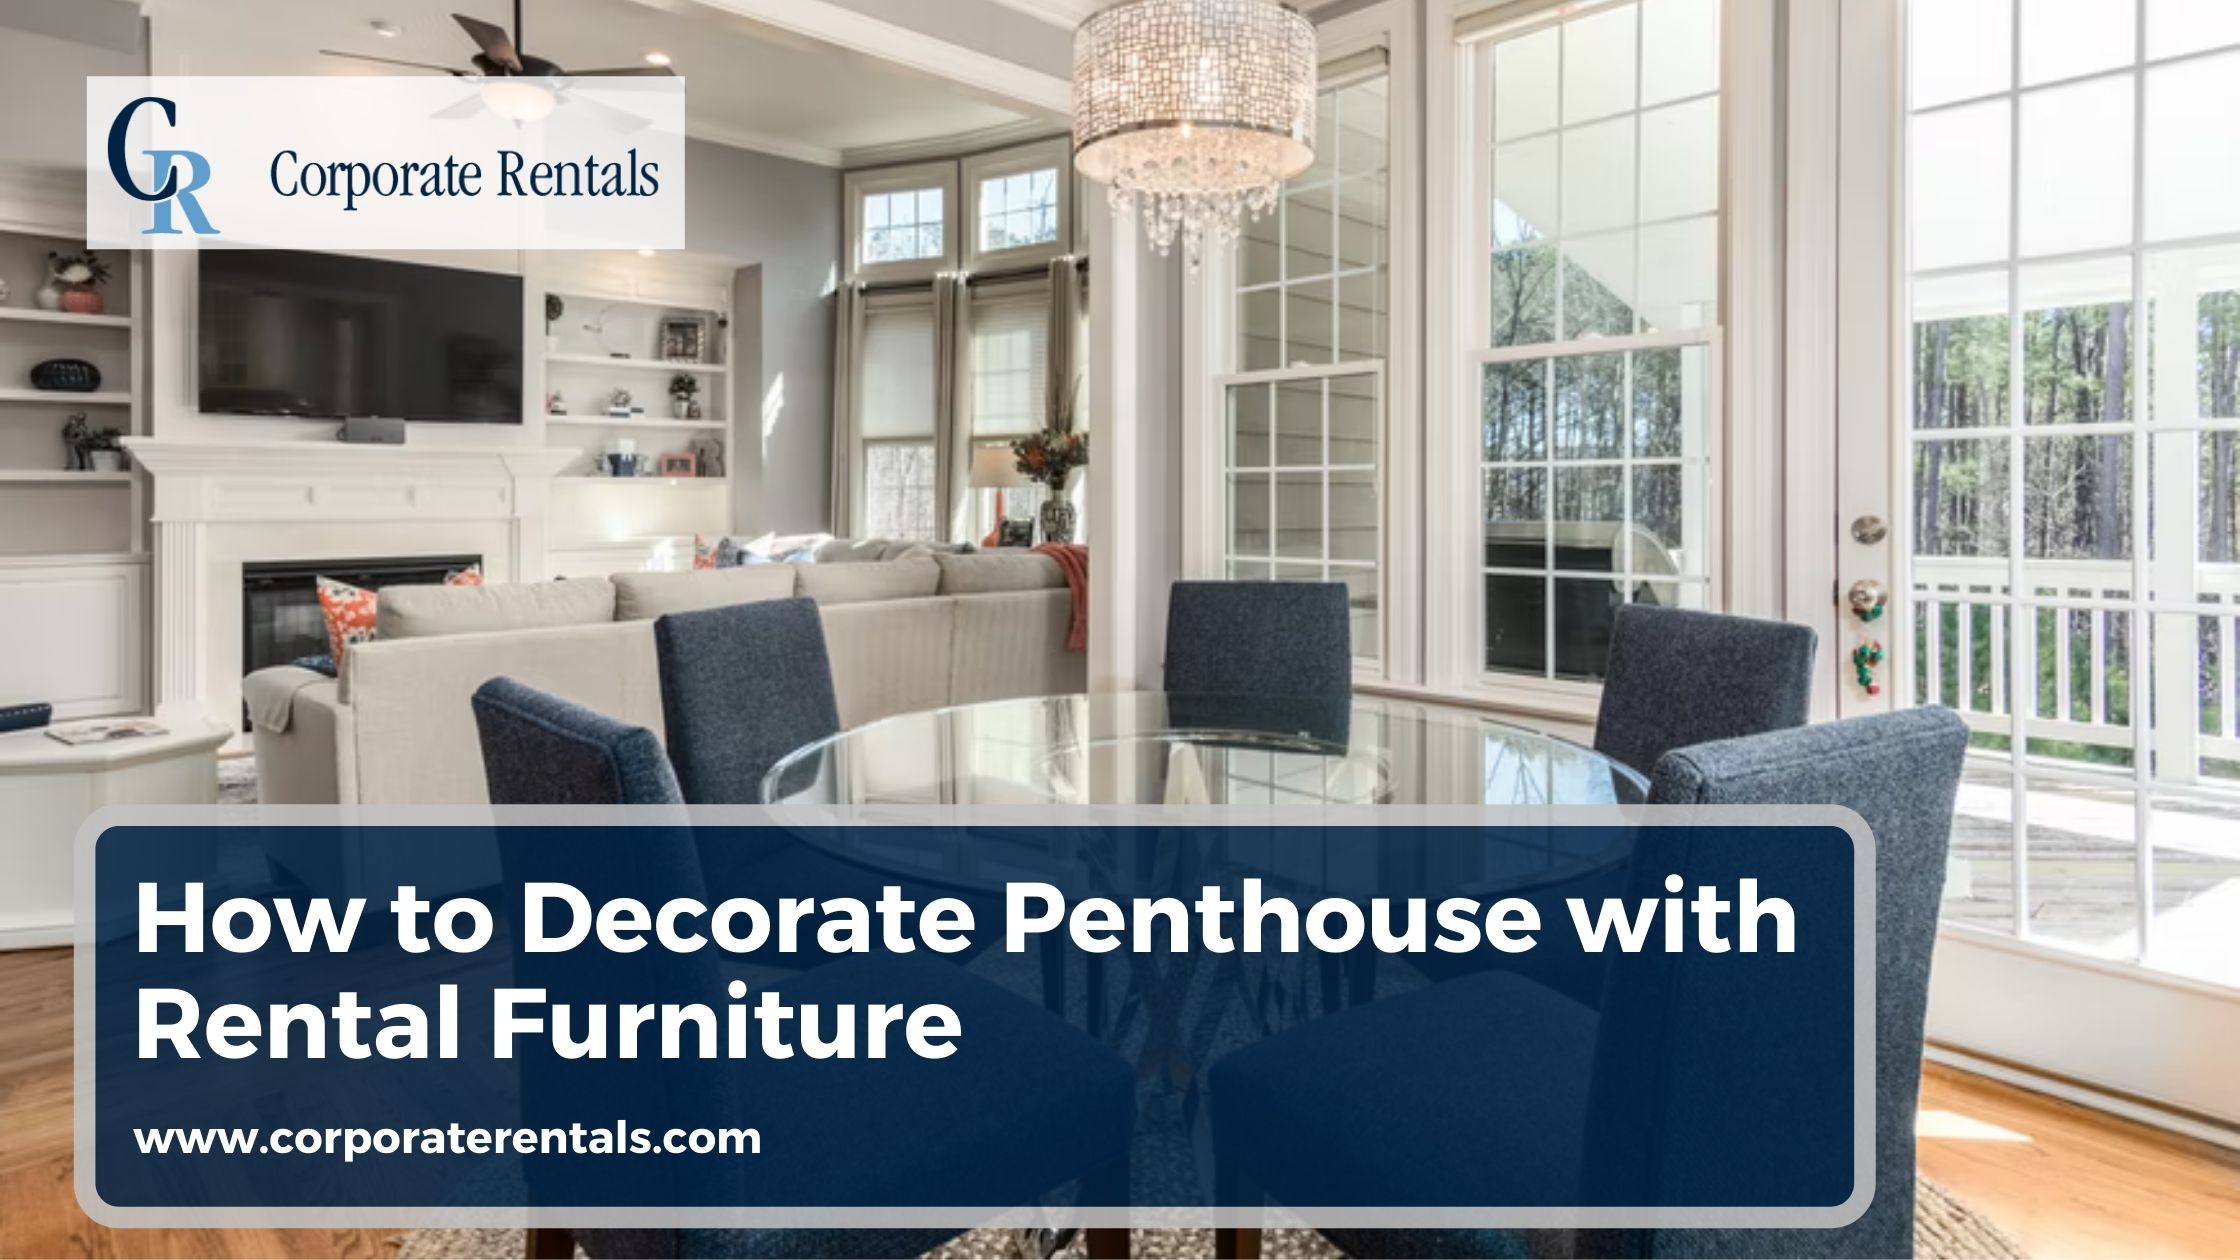 Summer Coming: How to Decorate Penthouse with Rental Furniture